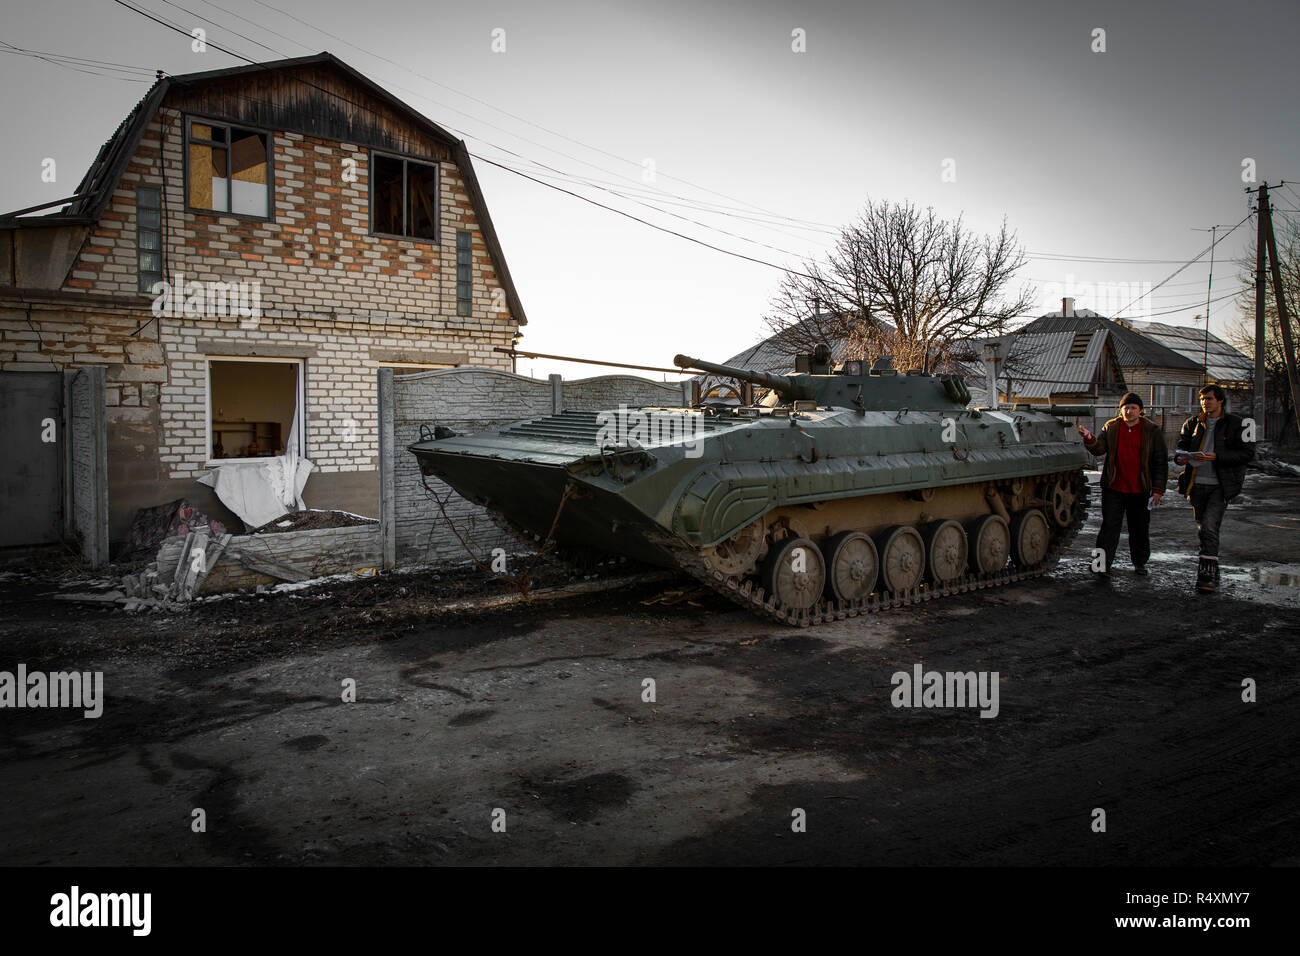 Destruction and chaos in Stanyzja-Luhanska on the front to the ATO zone, the separatist area of Eastern Ukraine. Stock Photo